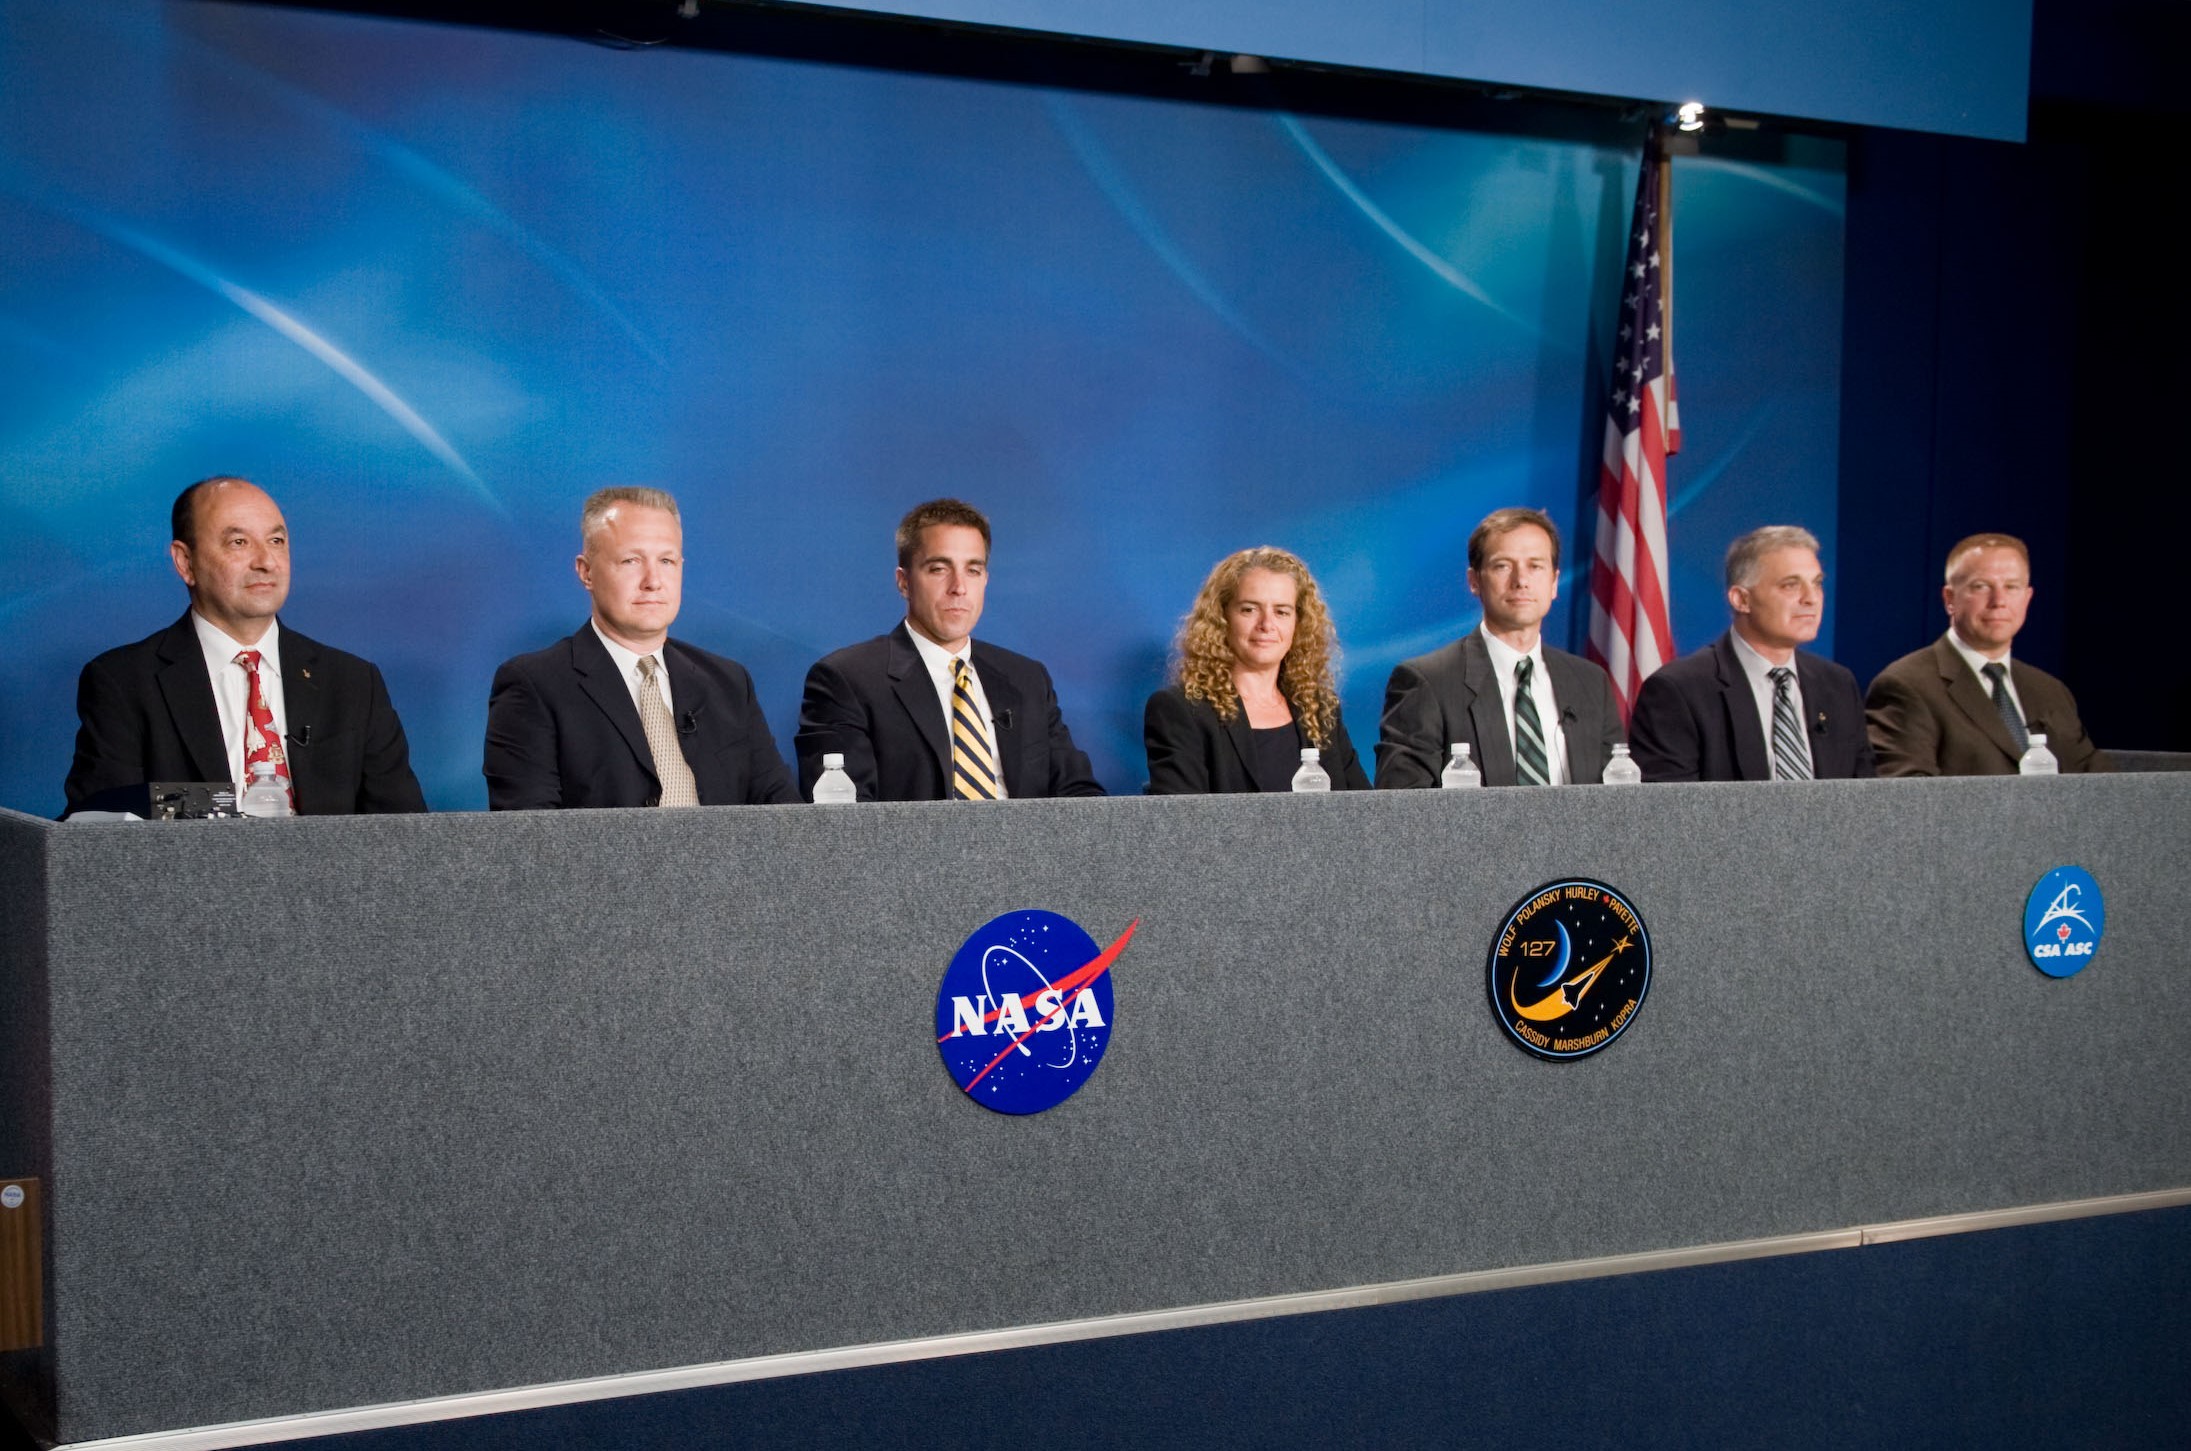 The STS-127 crew during their preflight press conference at NASA’s Johnson Space Center in Houston